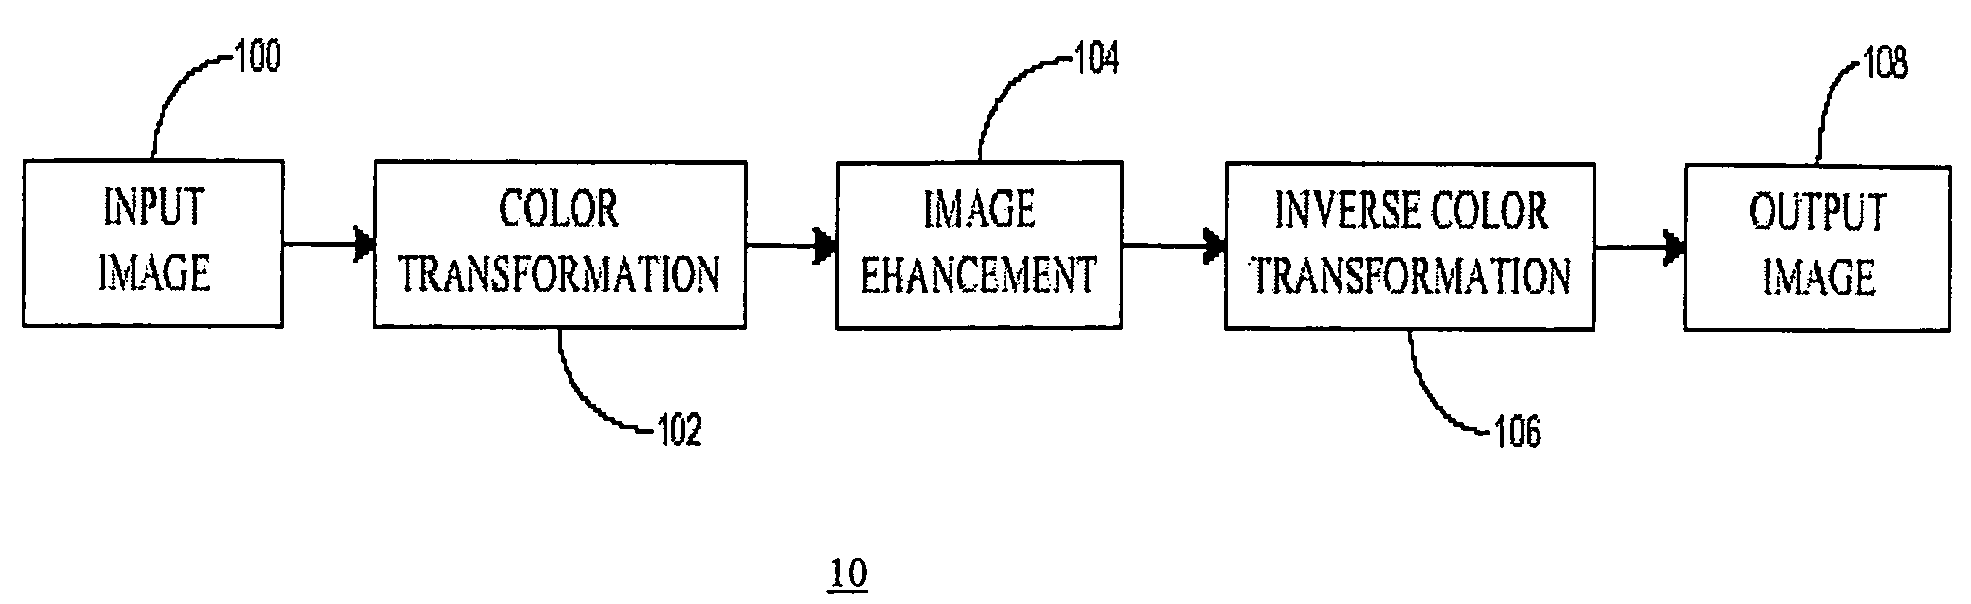 Method and apparatus for image processing based on a mapping function